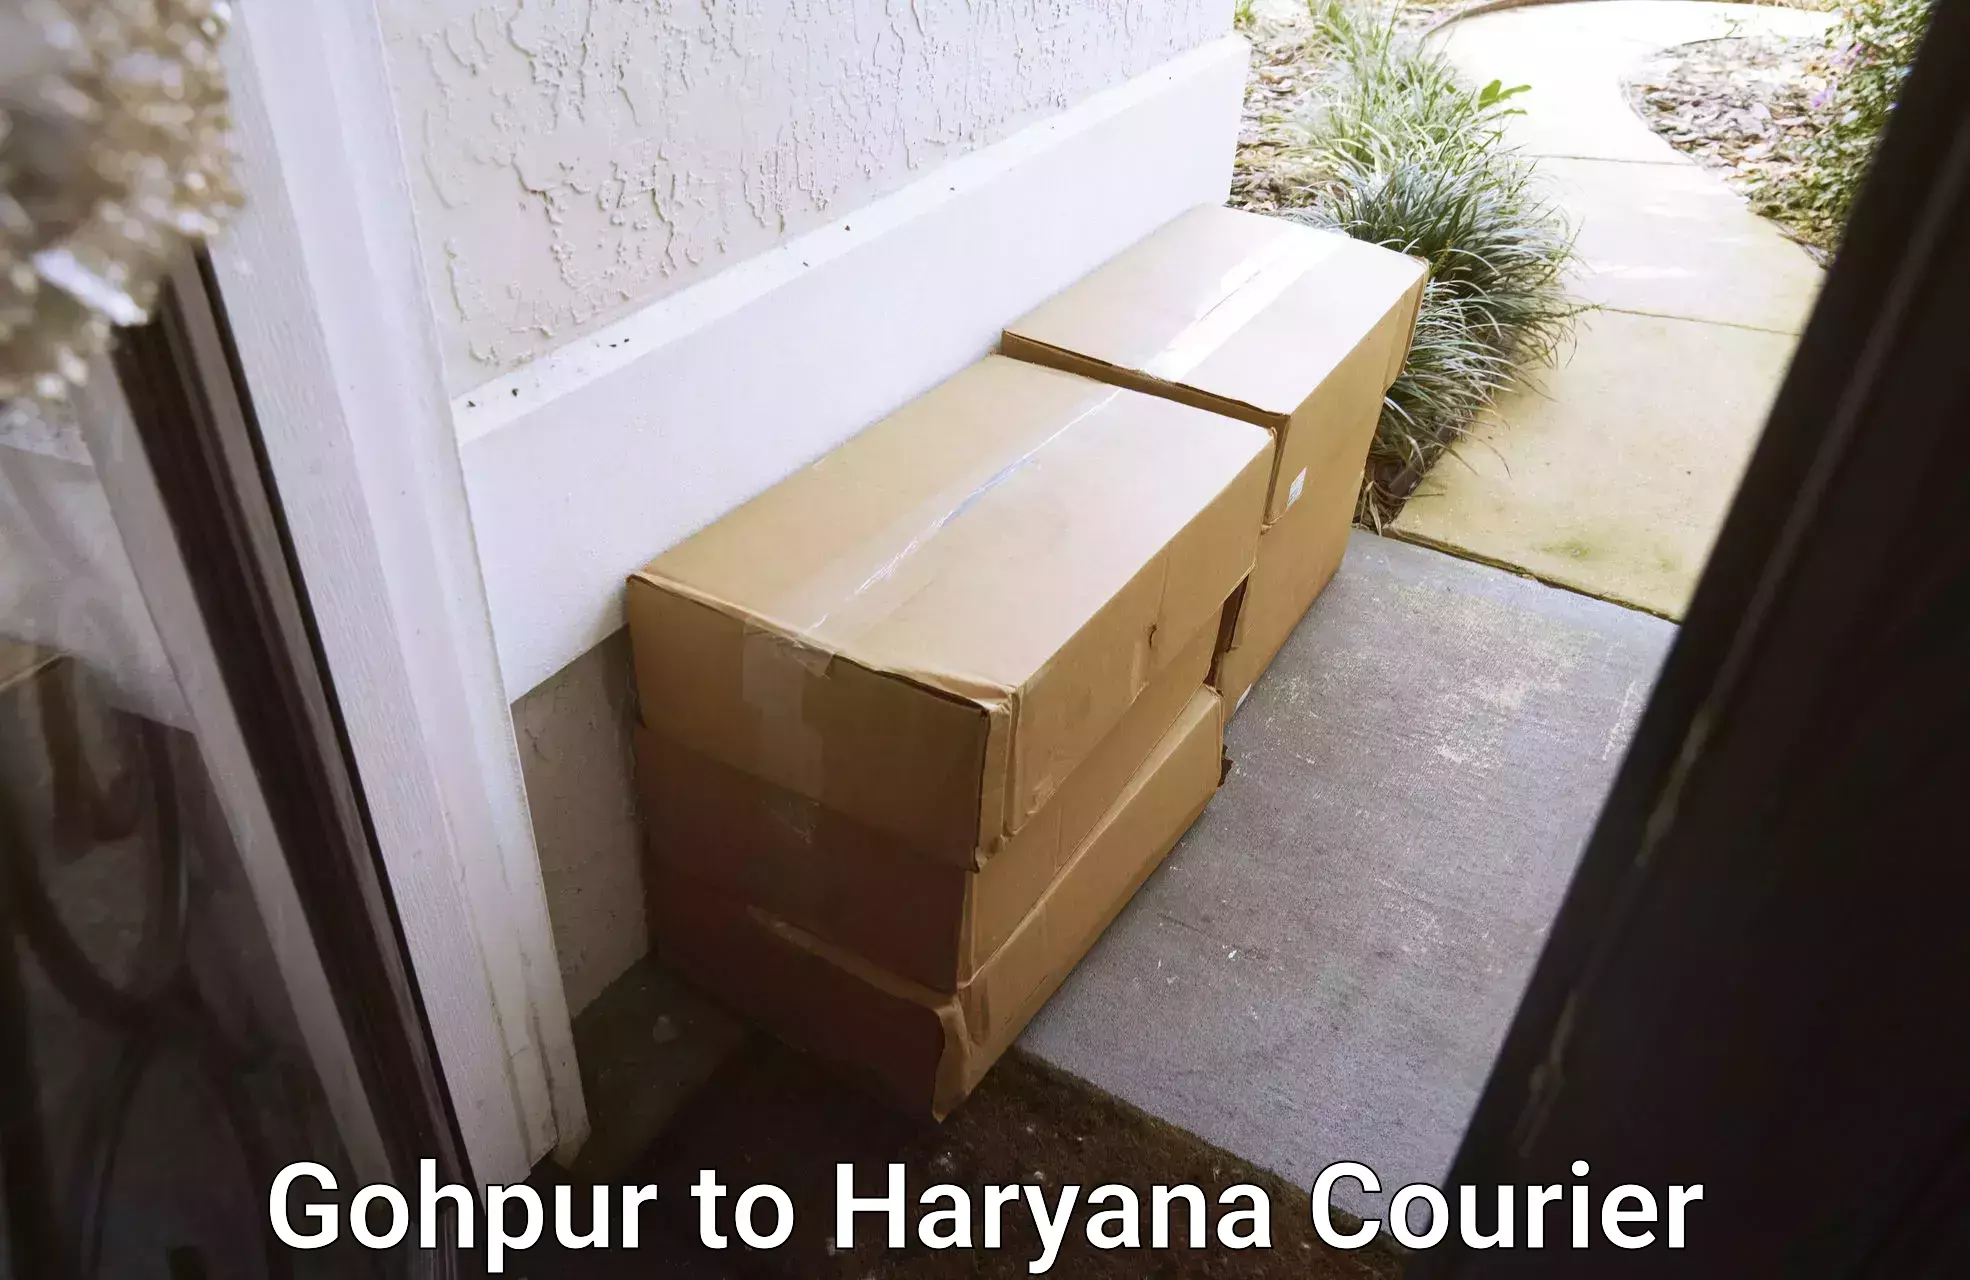 Customized delivery options Gohpur to Chaudhary Charan Singh Haryana Agricultural University Hisar